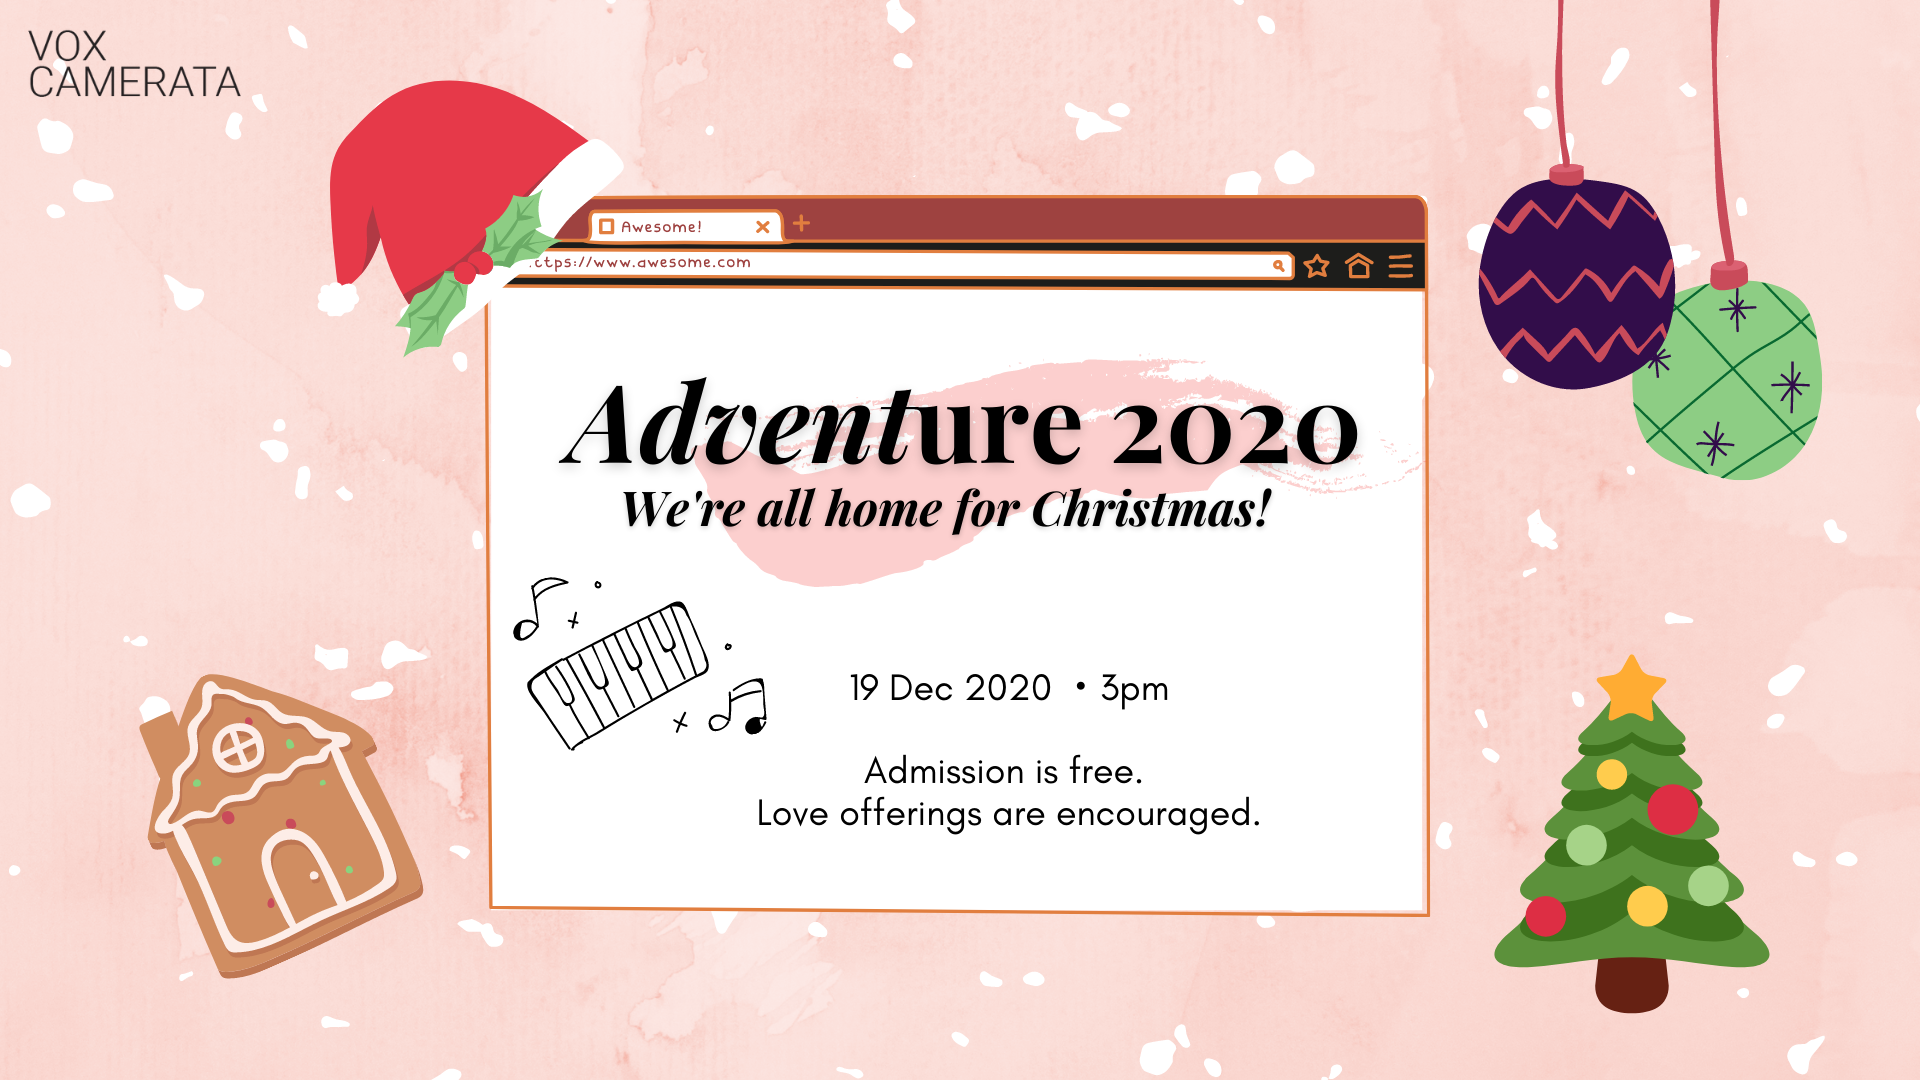 Adventure! 2020: We’re all home for Christmas